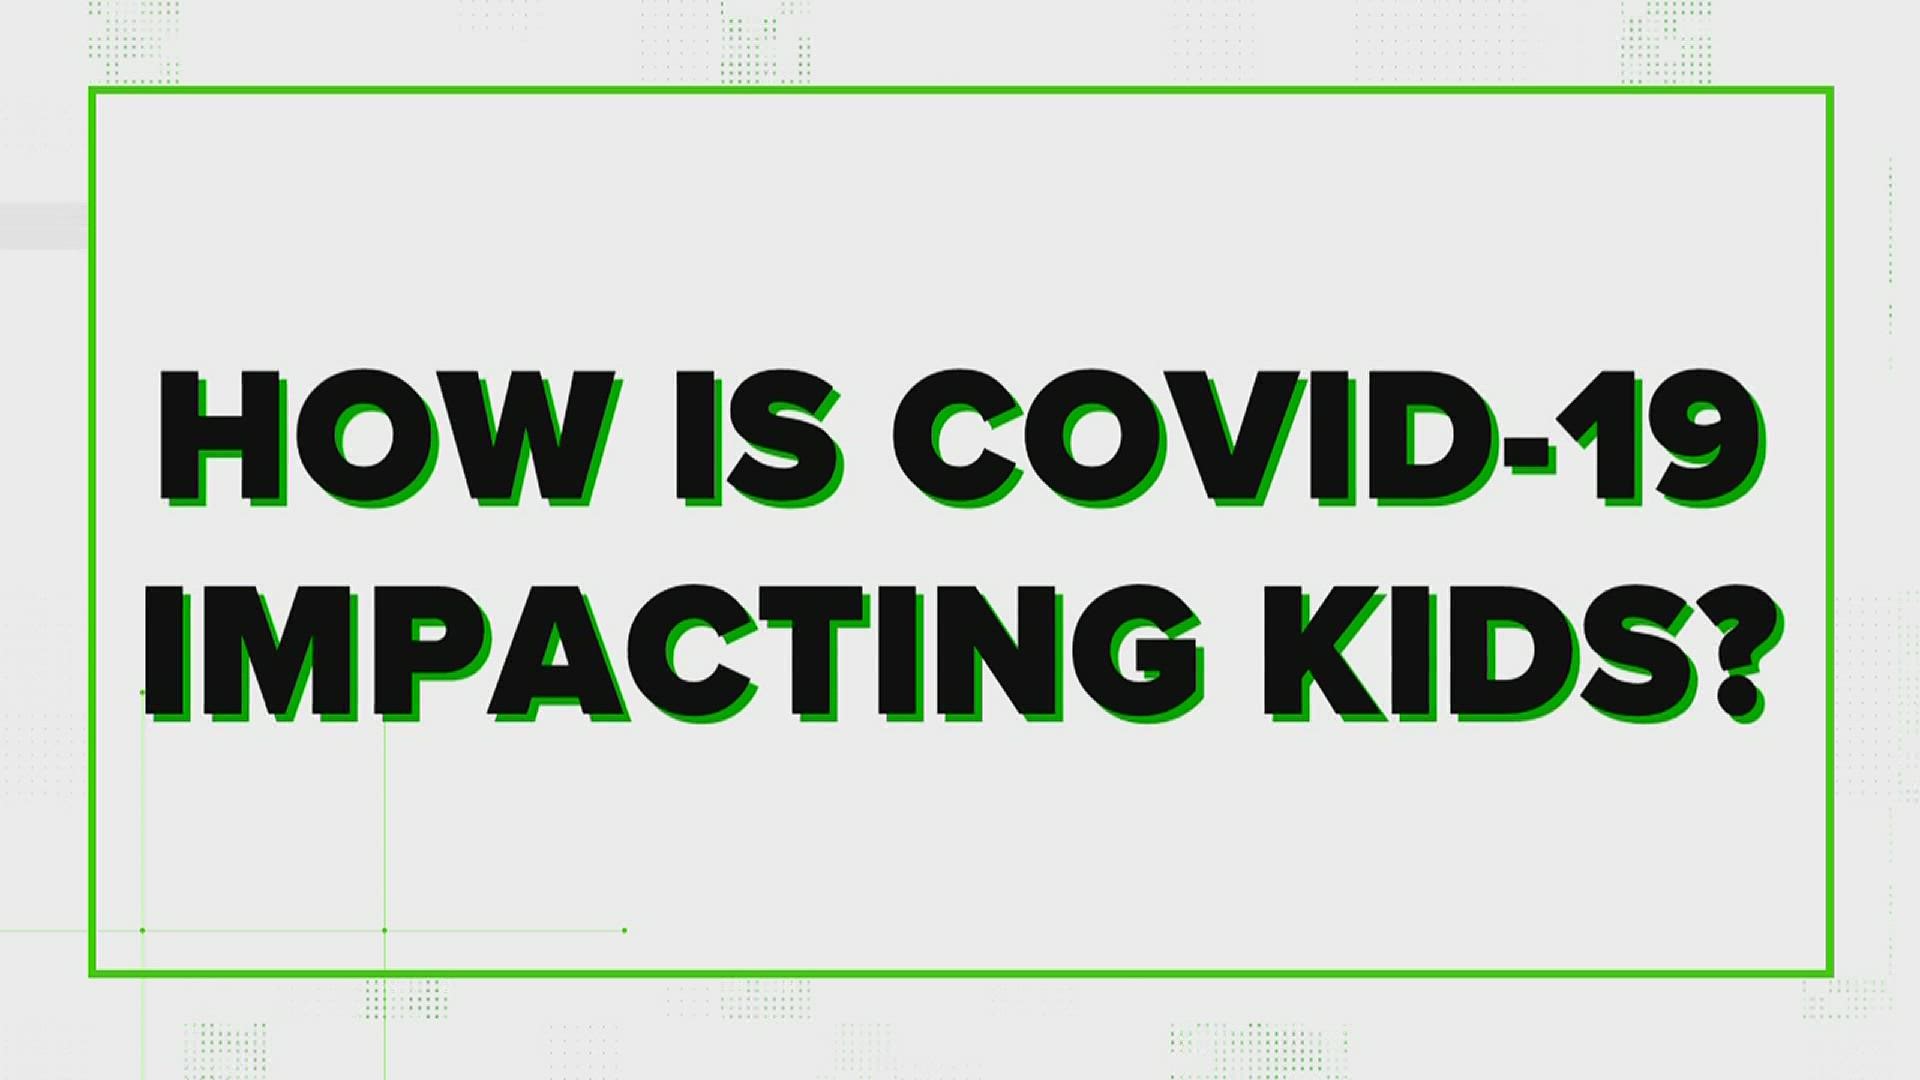 Though new cases of COVID are increasing at a faster rate, the hospitalization rate remains the same.